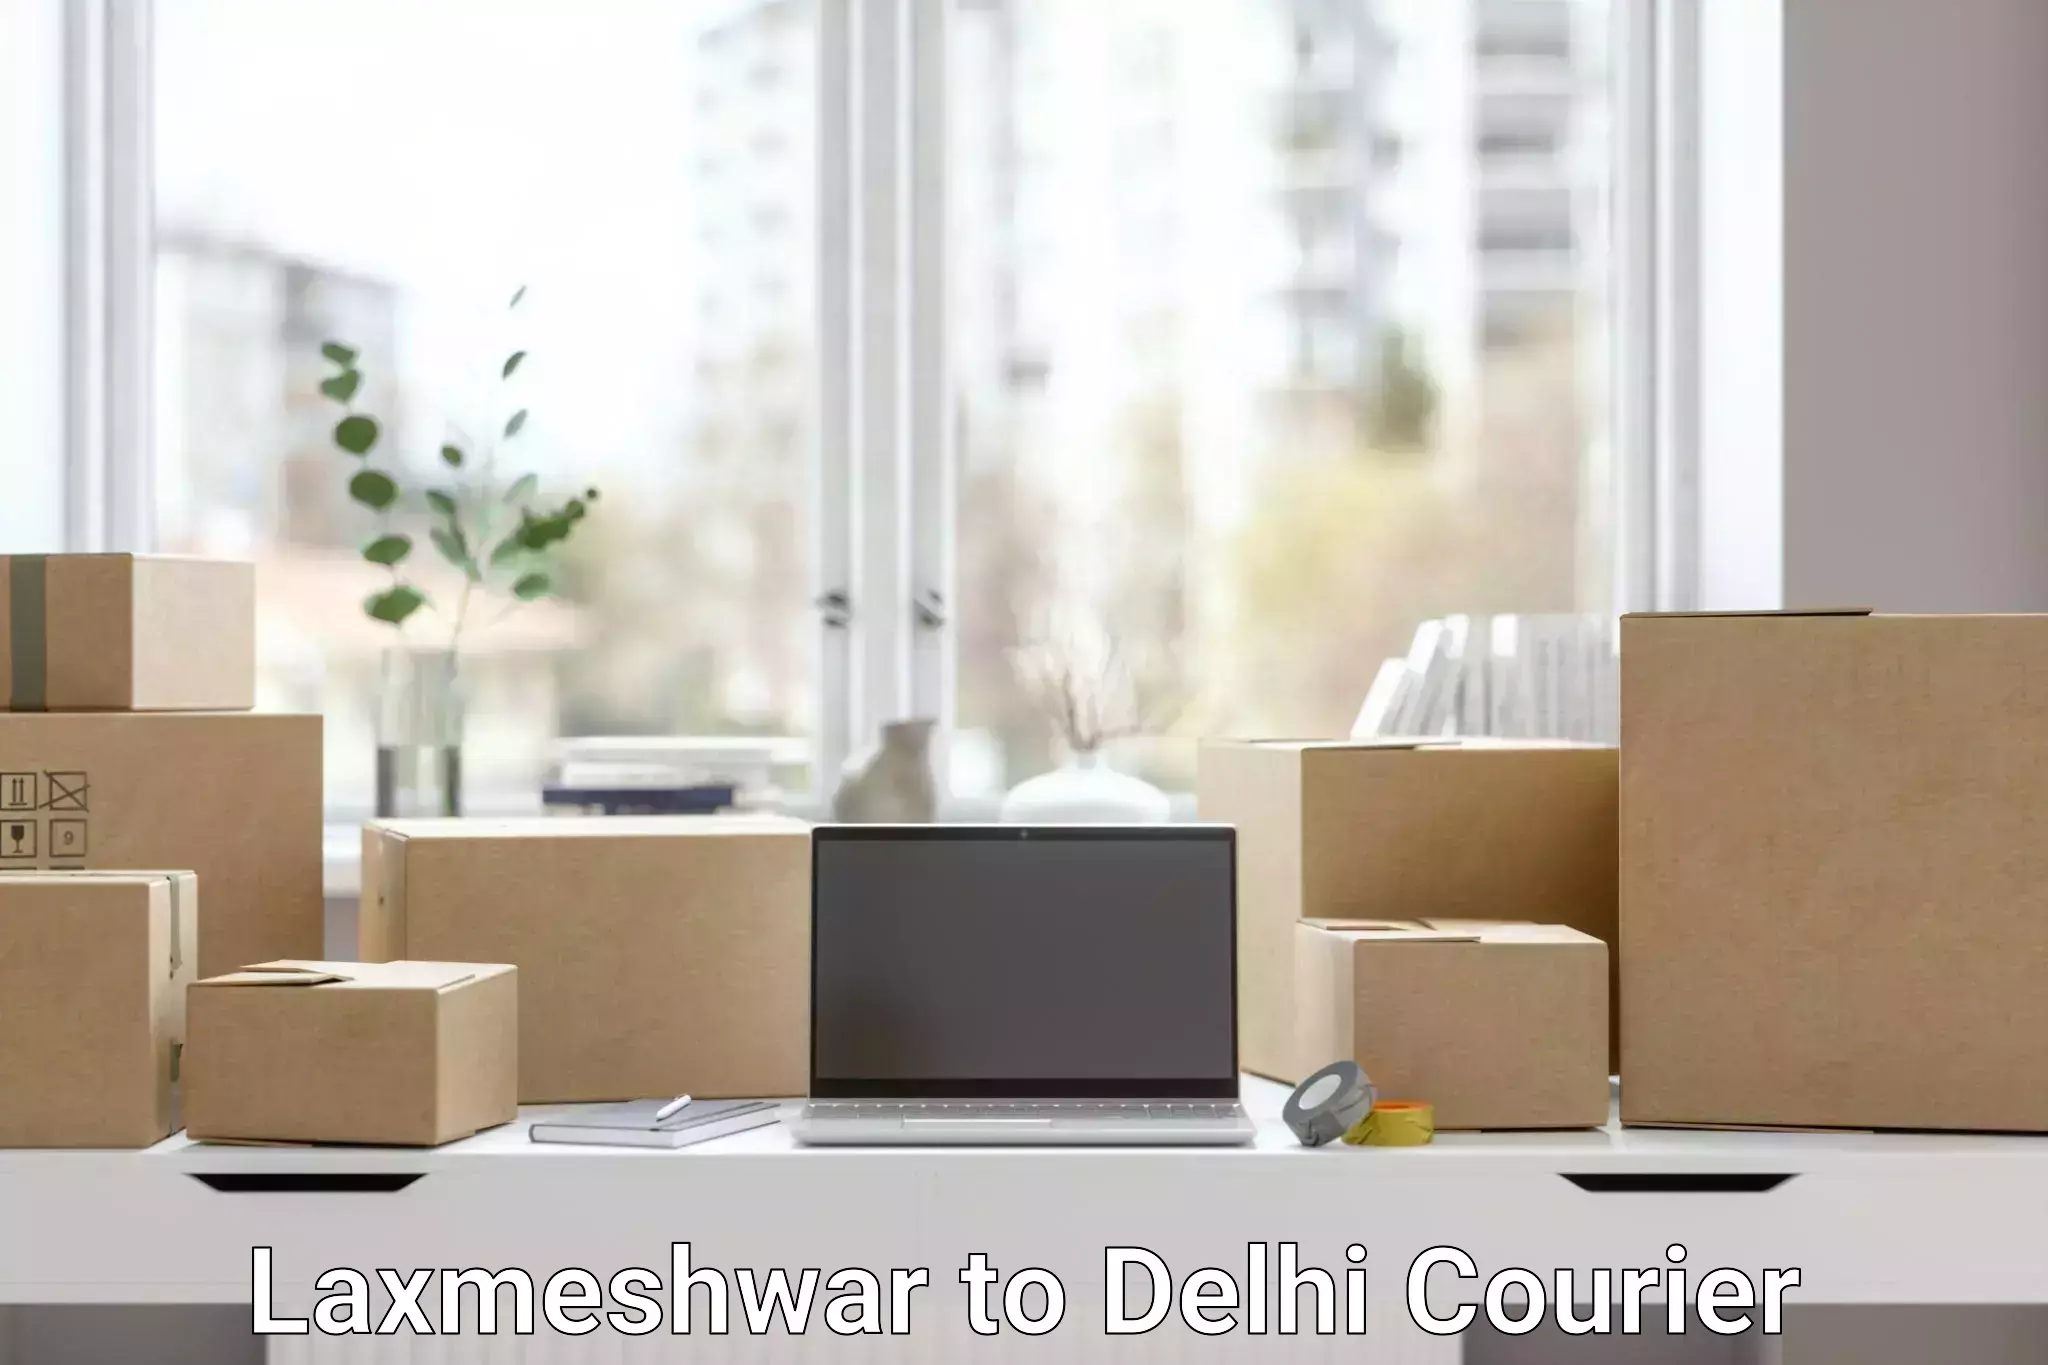 24-hour courier services Laxmeshwar to NIT Delhi